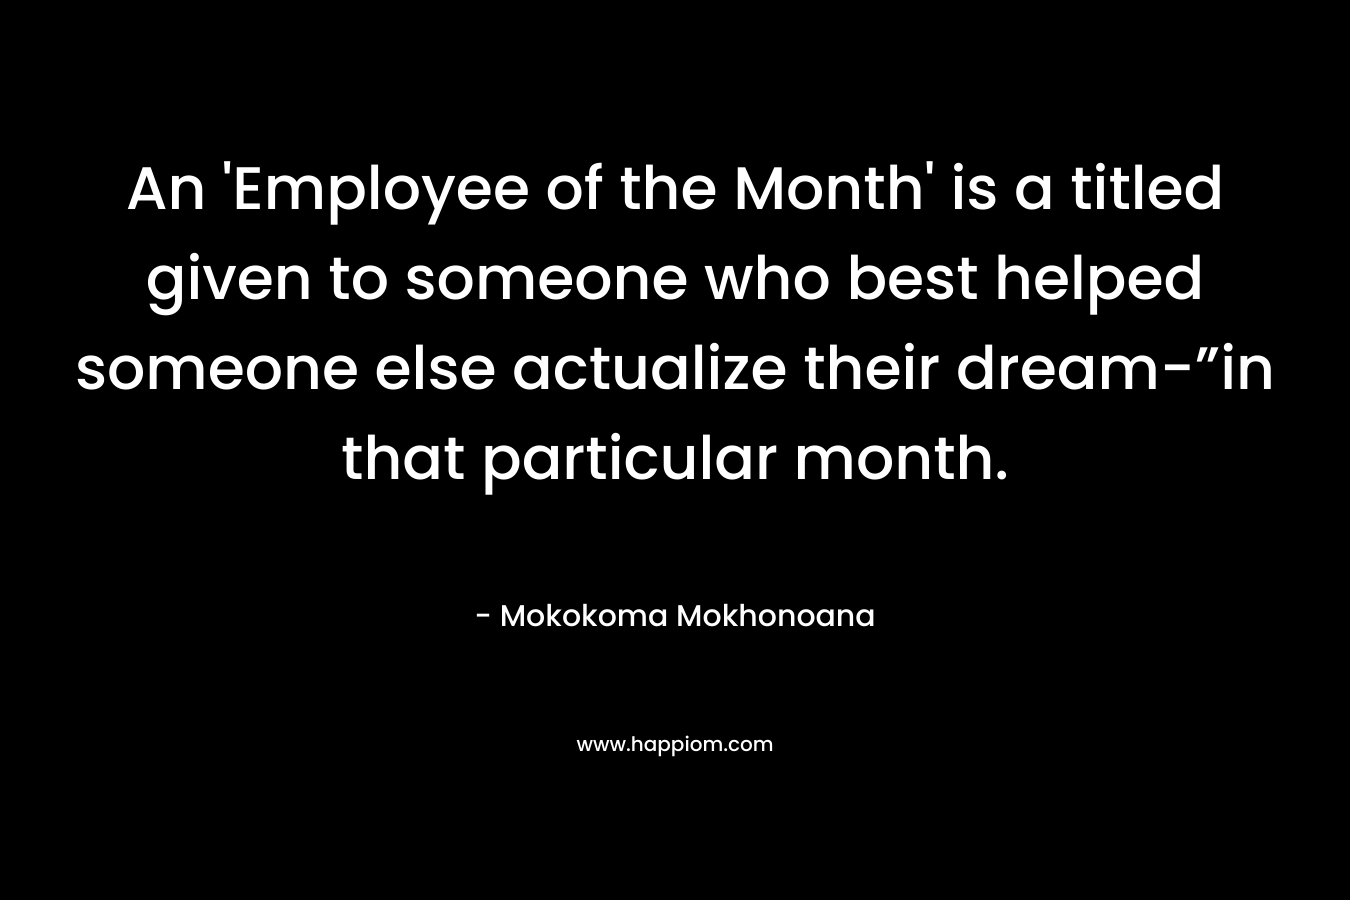 An 'Employee of the Month' is a titled given to someone who best helped someone else actualize their dream-”in that particular month.